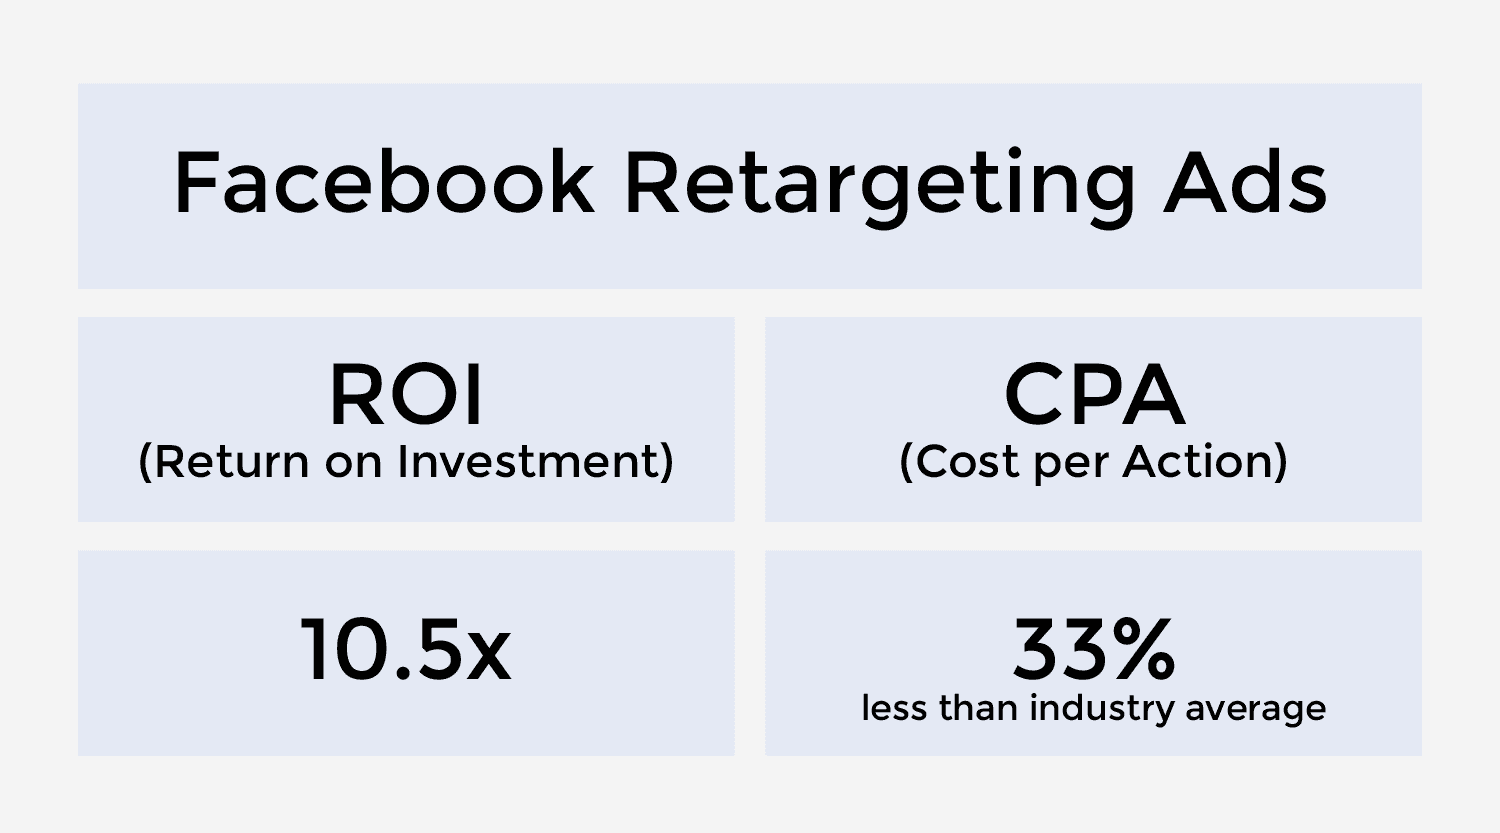 Facebook retargeting ads earn a 10X ROI at 33% less cost than the industry average.